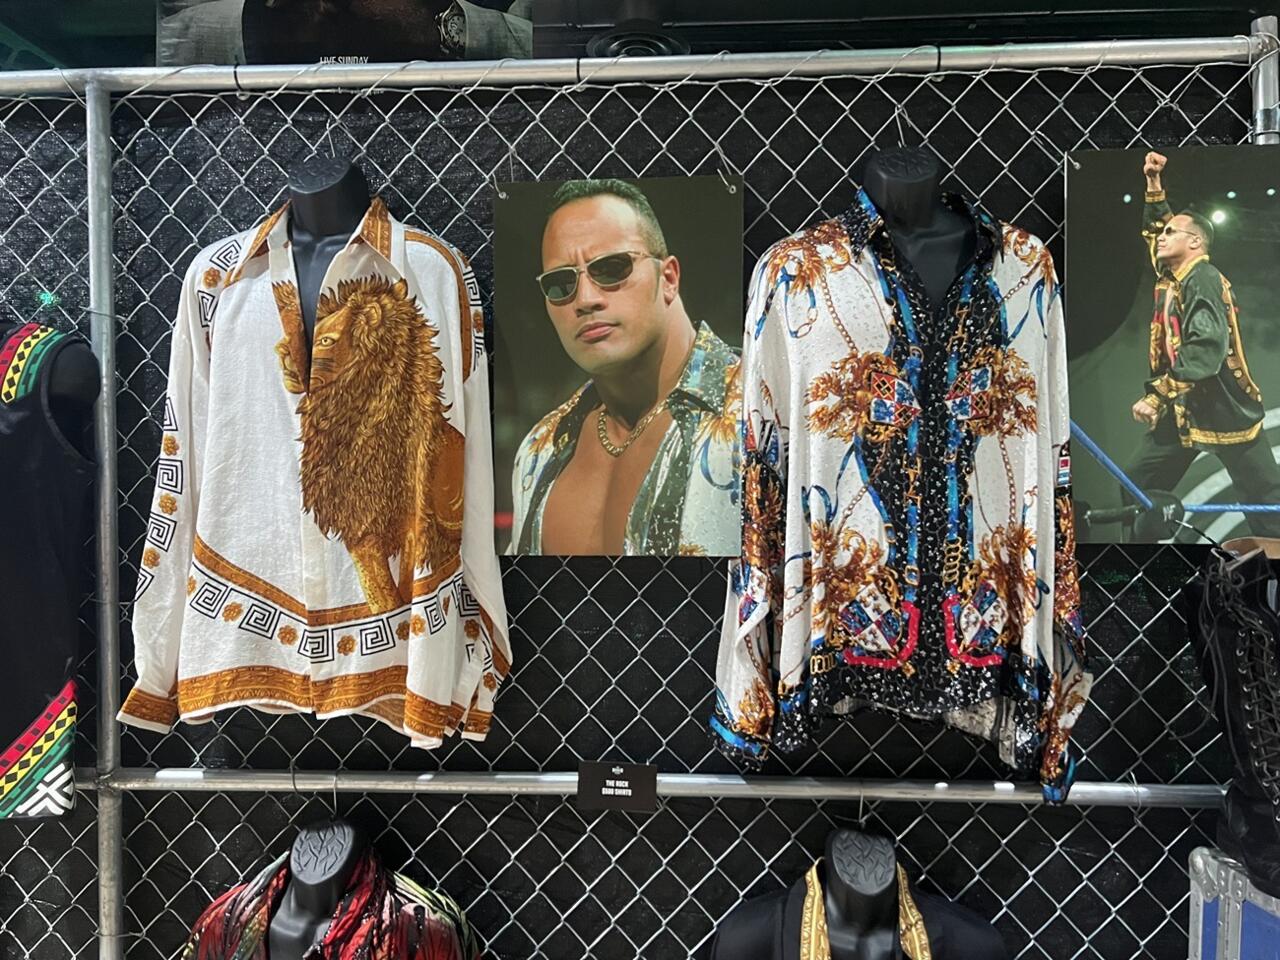 The Rock's $500 shirts